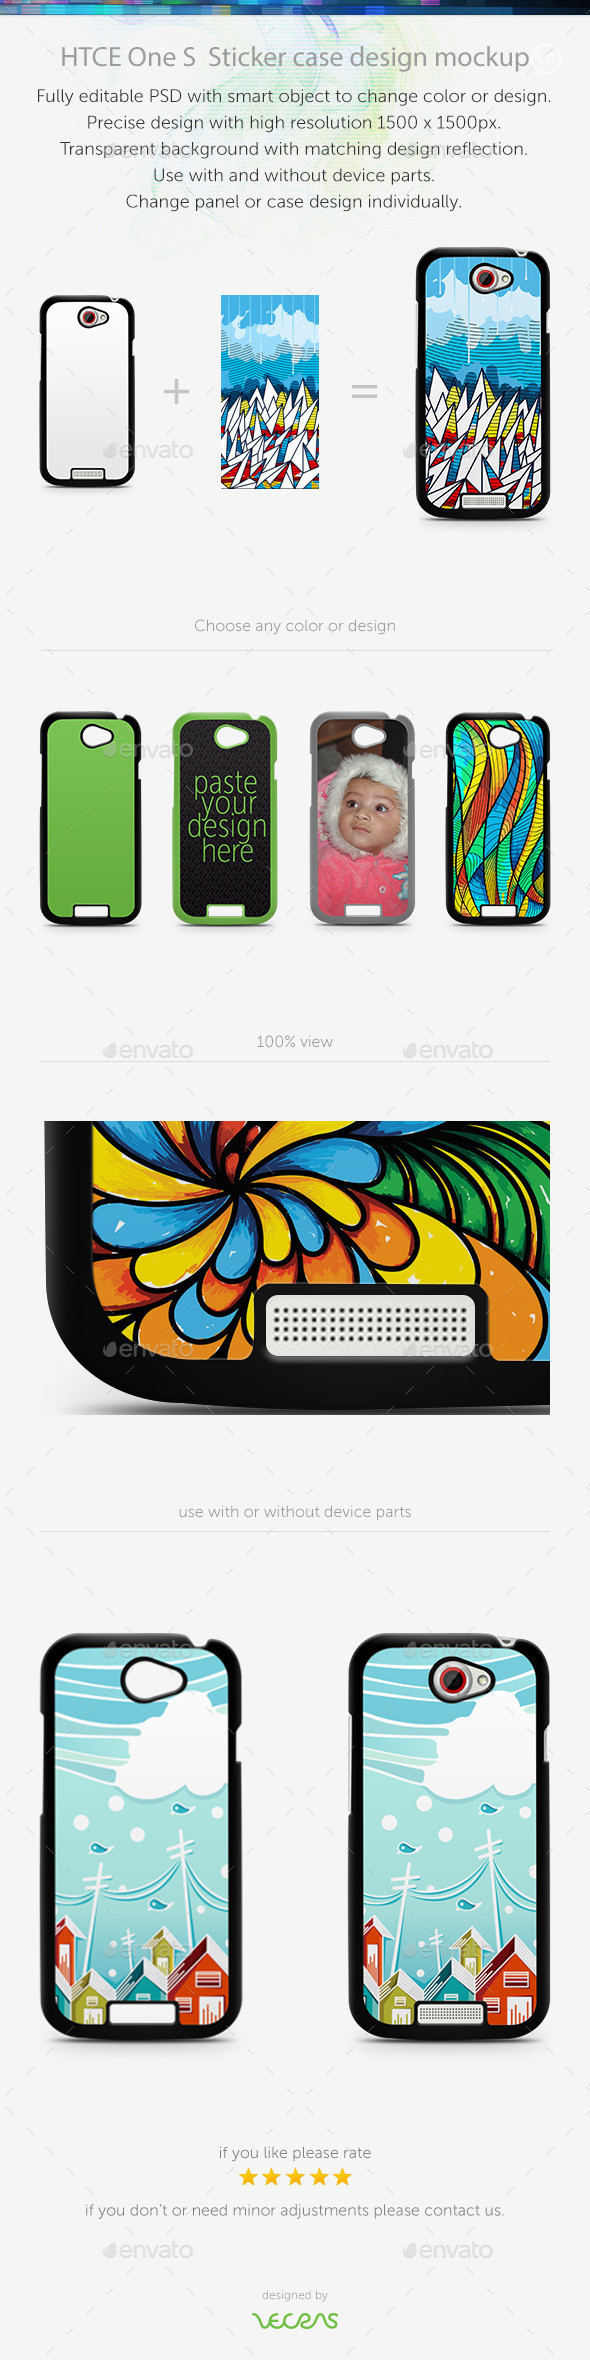 Preview htce one s stickercase mockup back